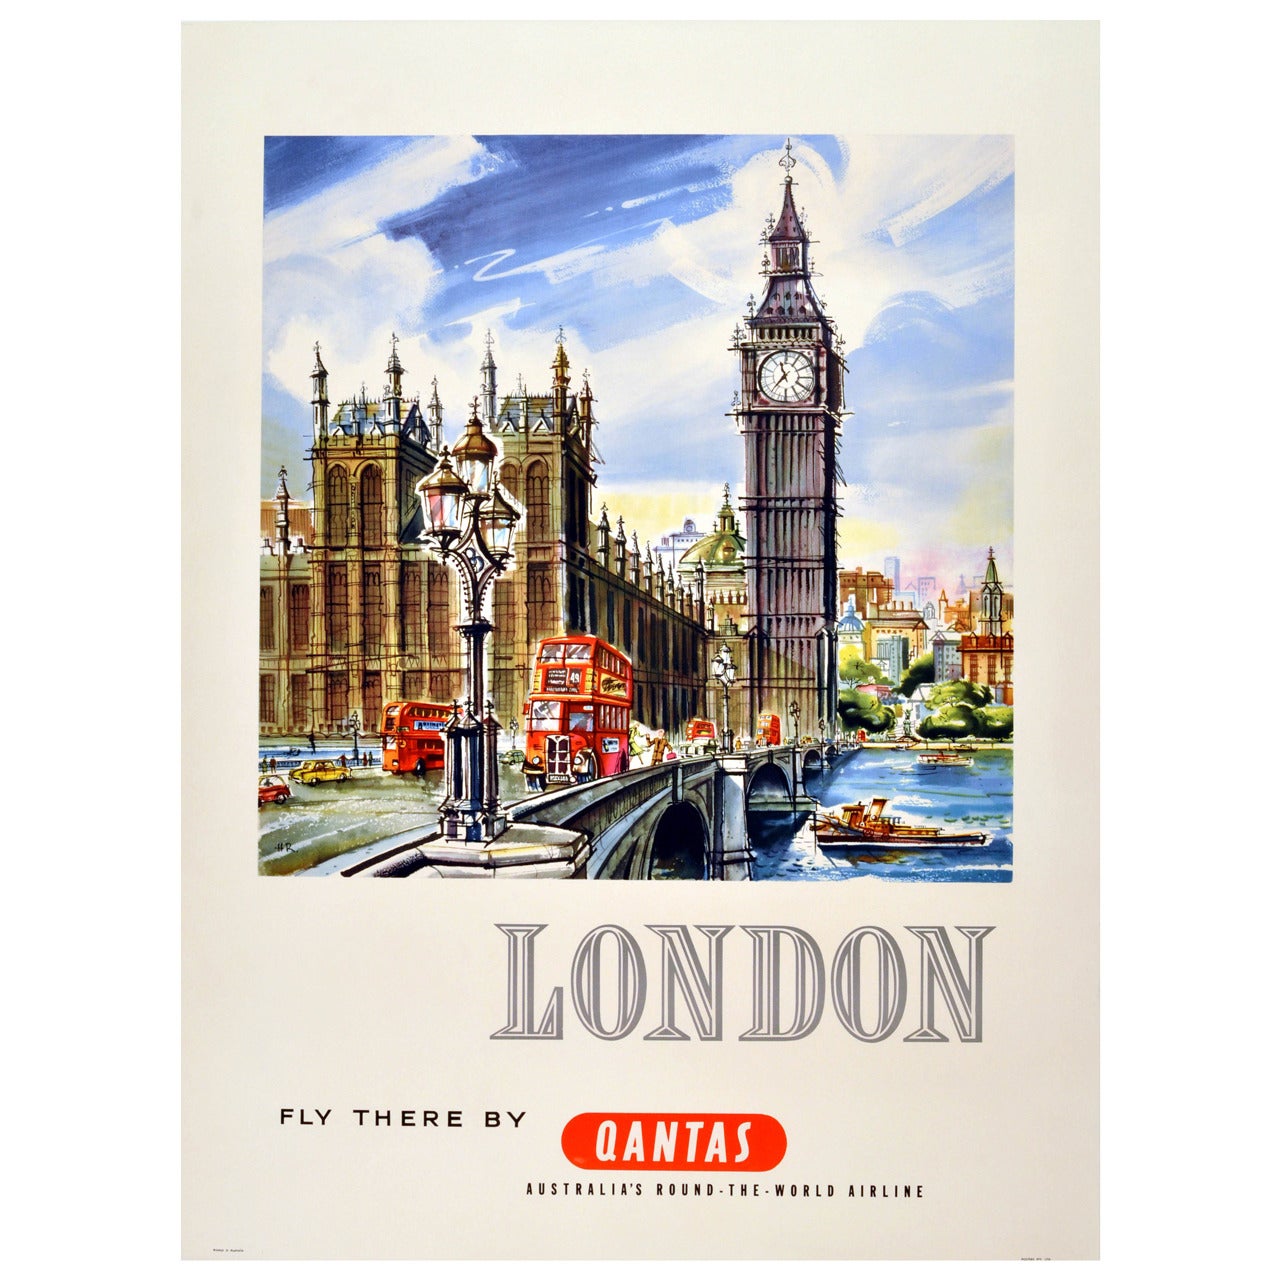 Original 1950s Vintage Travel Advertising Poster "London - Fly There By Qantas"